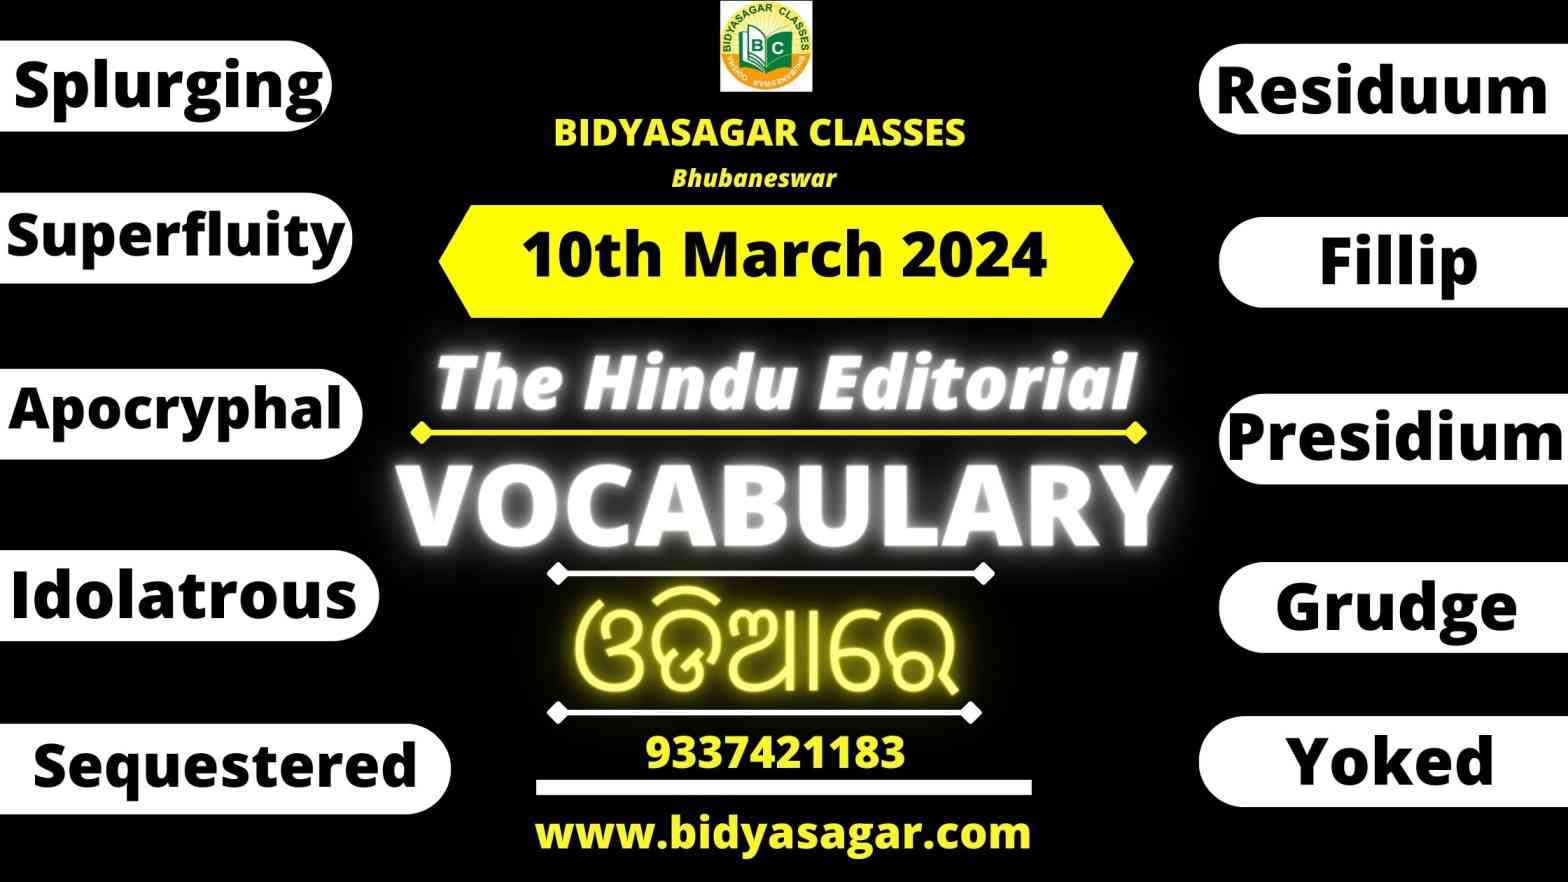 The Hindu Editorial Vocabulary of 10th March 2024